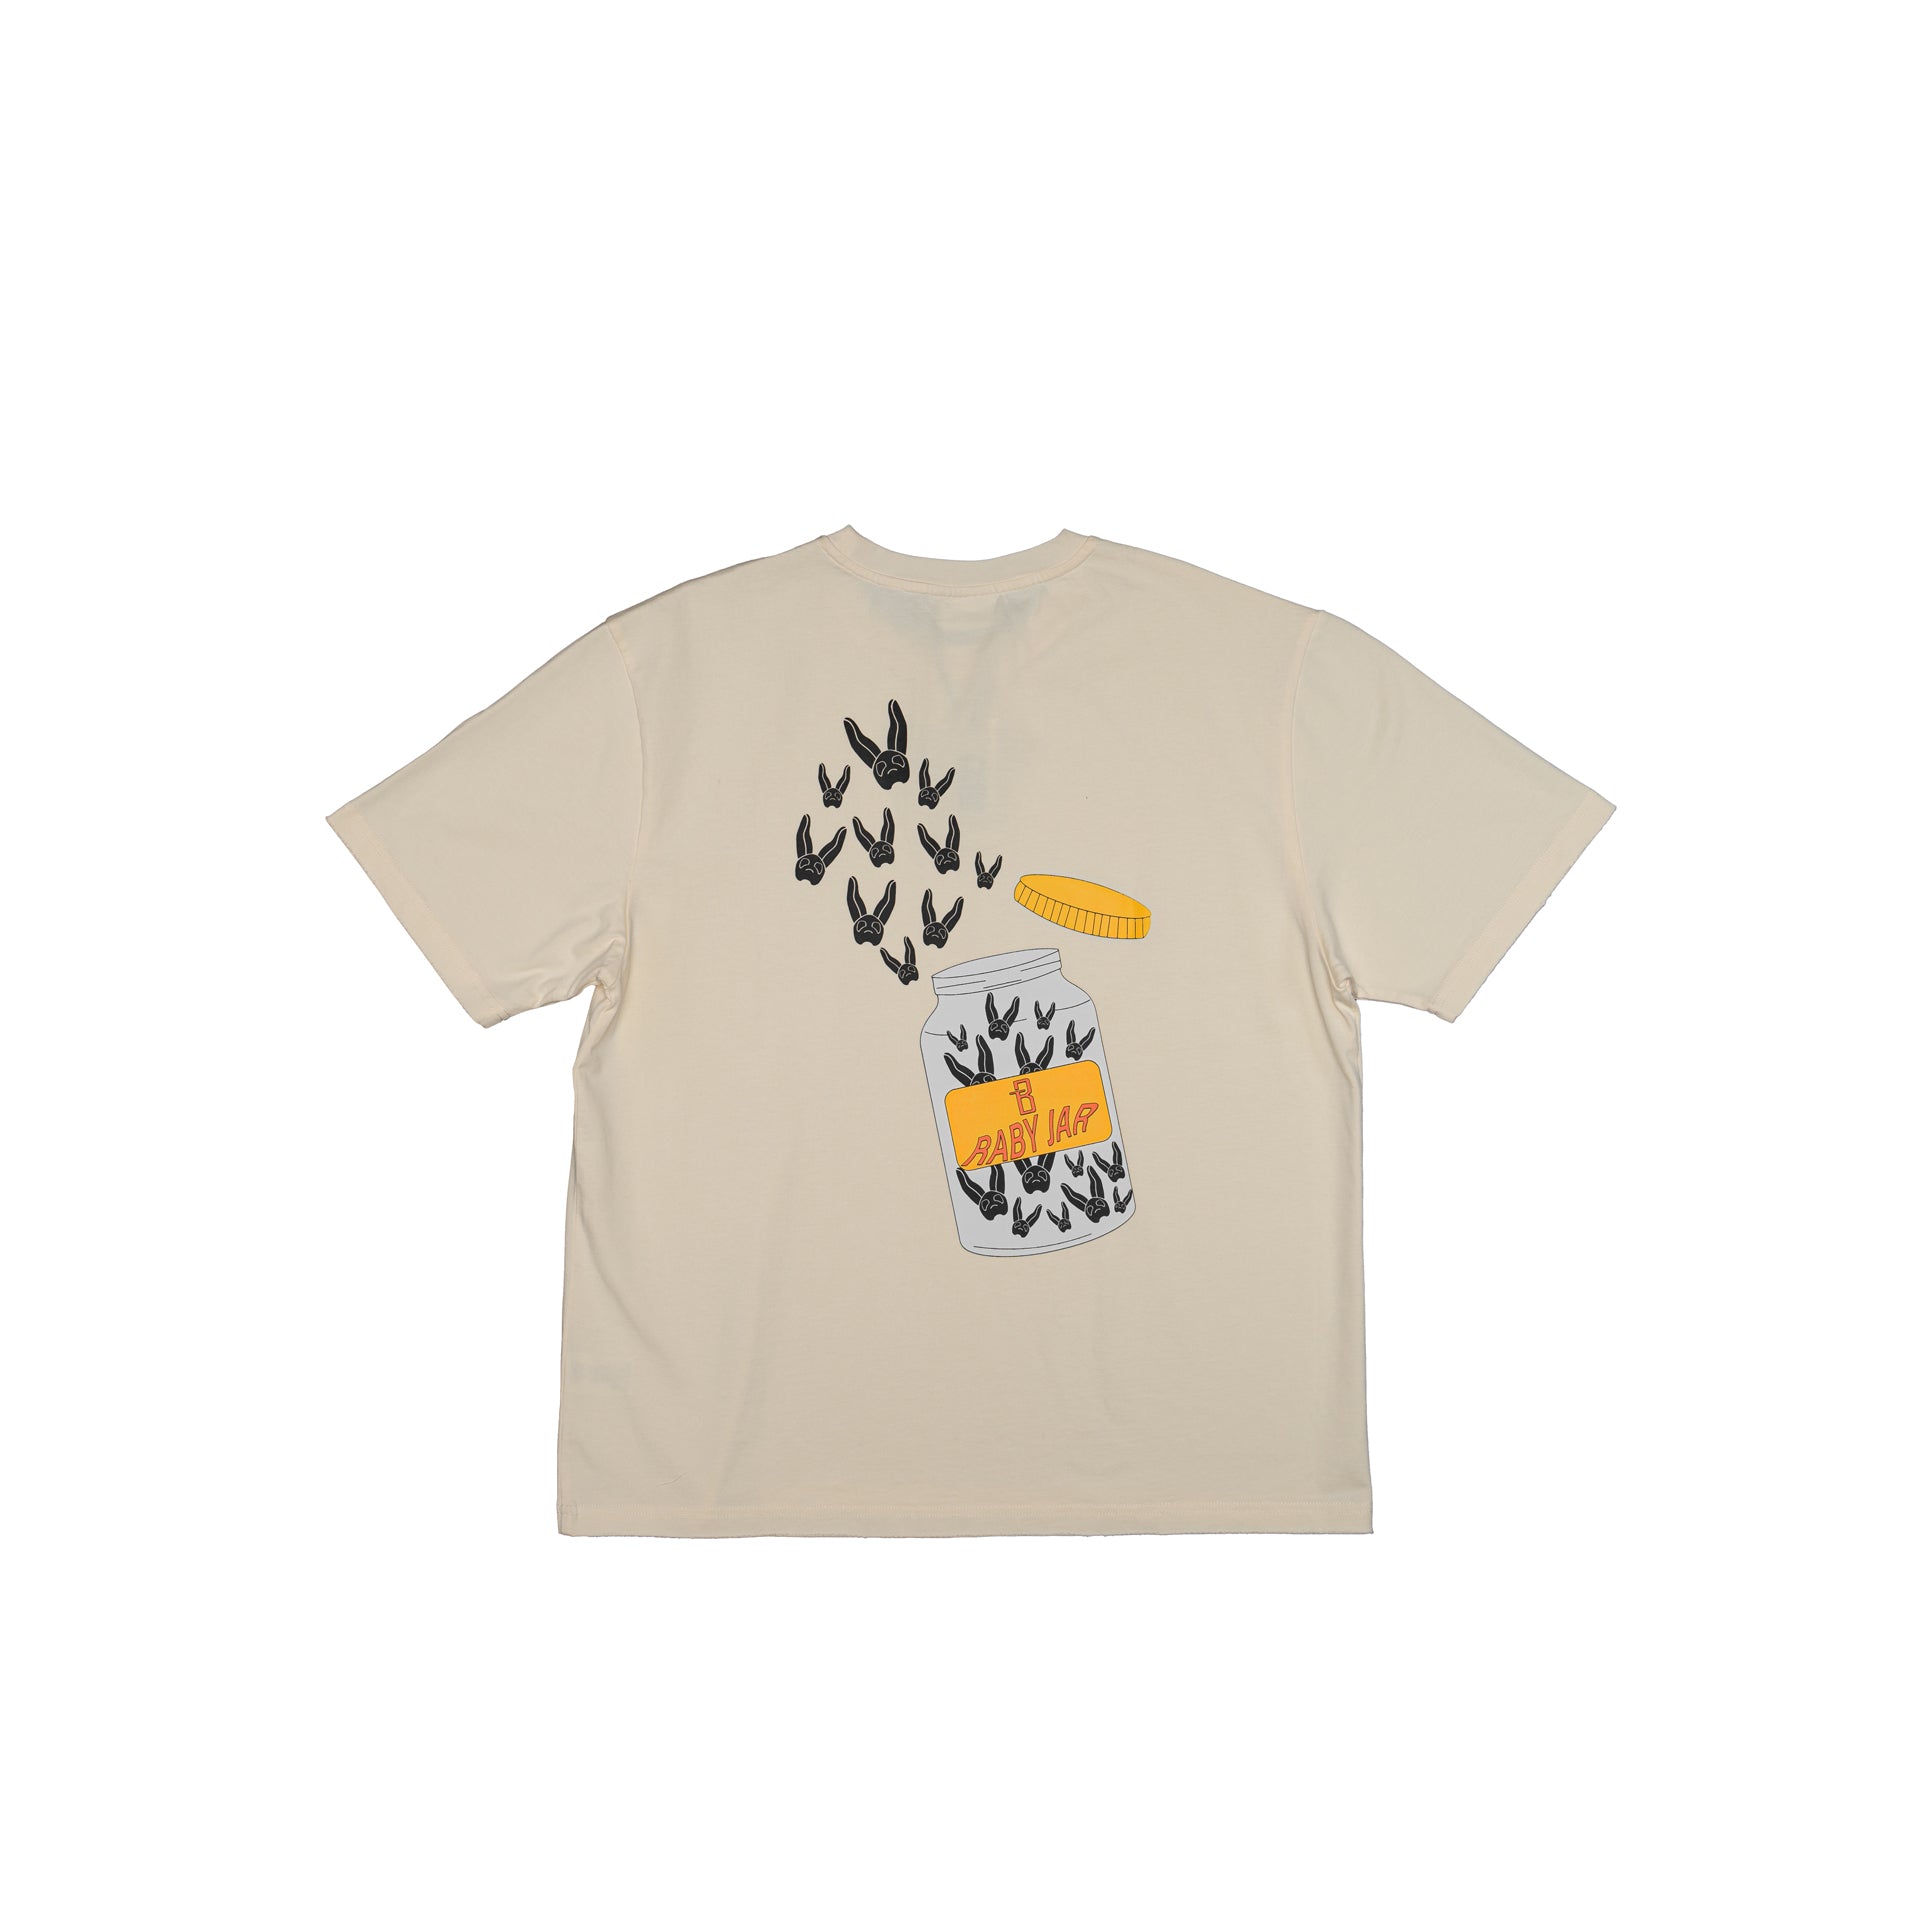 Beige T-shirt "The Jar" by Brandtionary